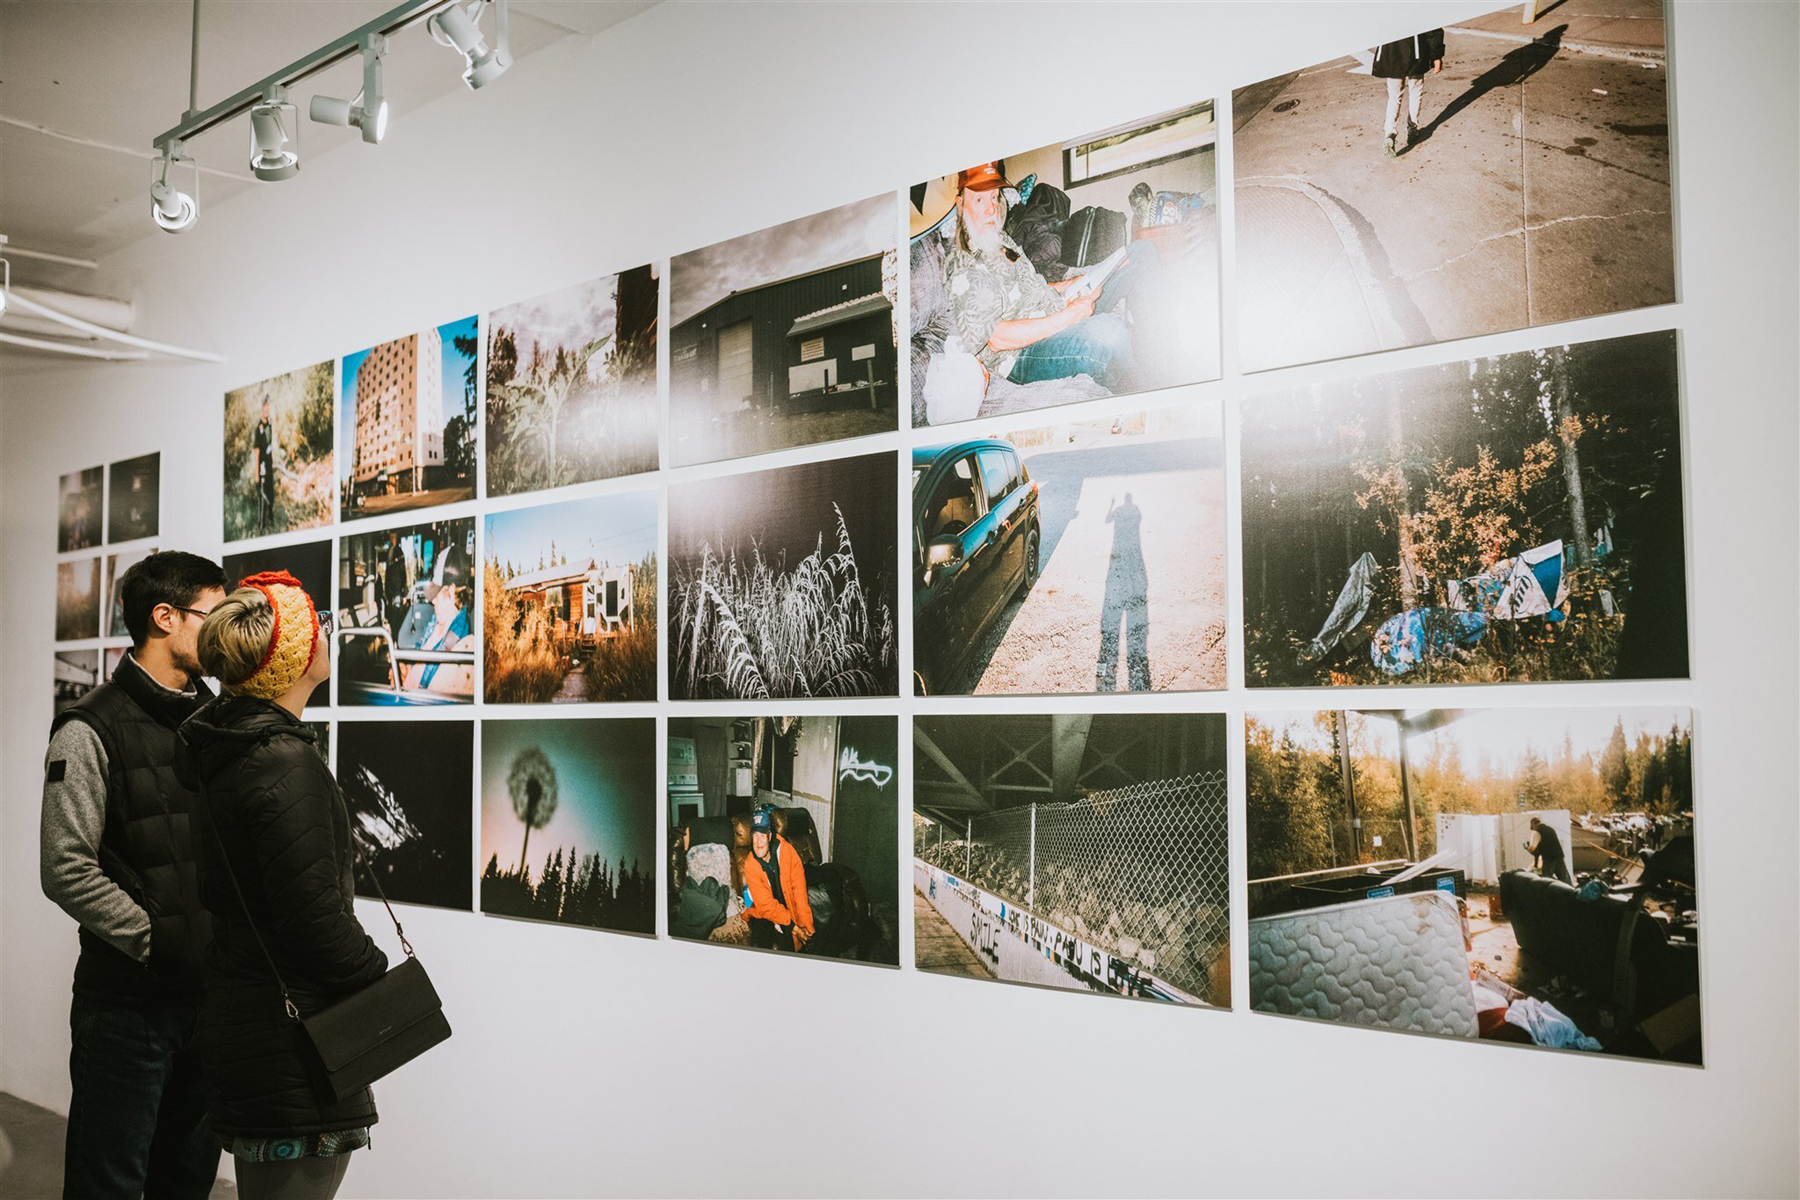 The North Gallery houses the “Through Our Eyes” project. The images displayed in this iteration of the exhibition were all taken by people who are experiencing homelessness in Fairbanks, AK. Most of the images were captured by homelessness children. Image courtesy of Donna Marie Photography